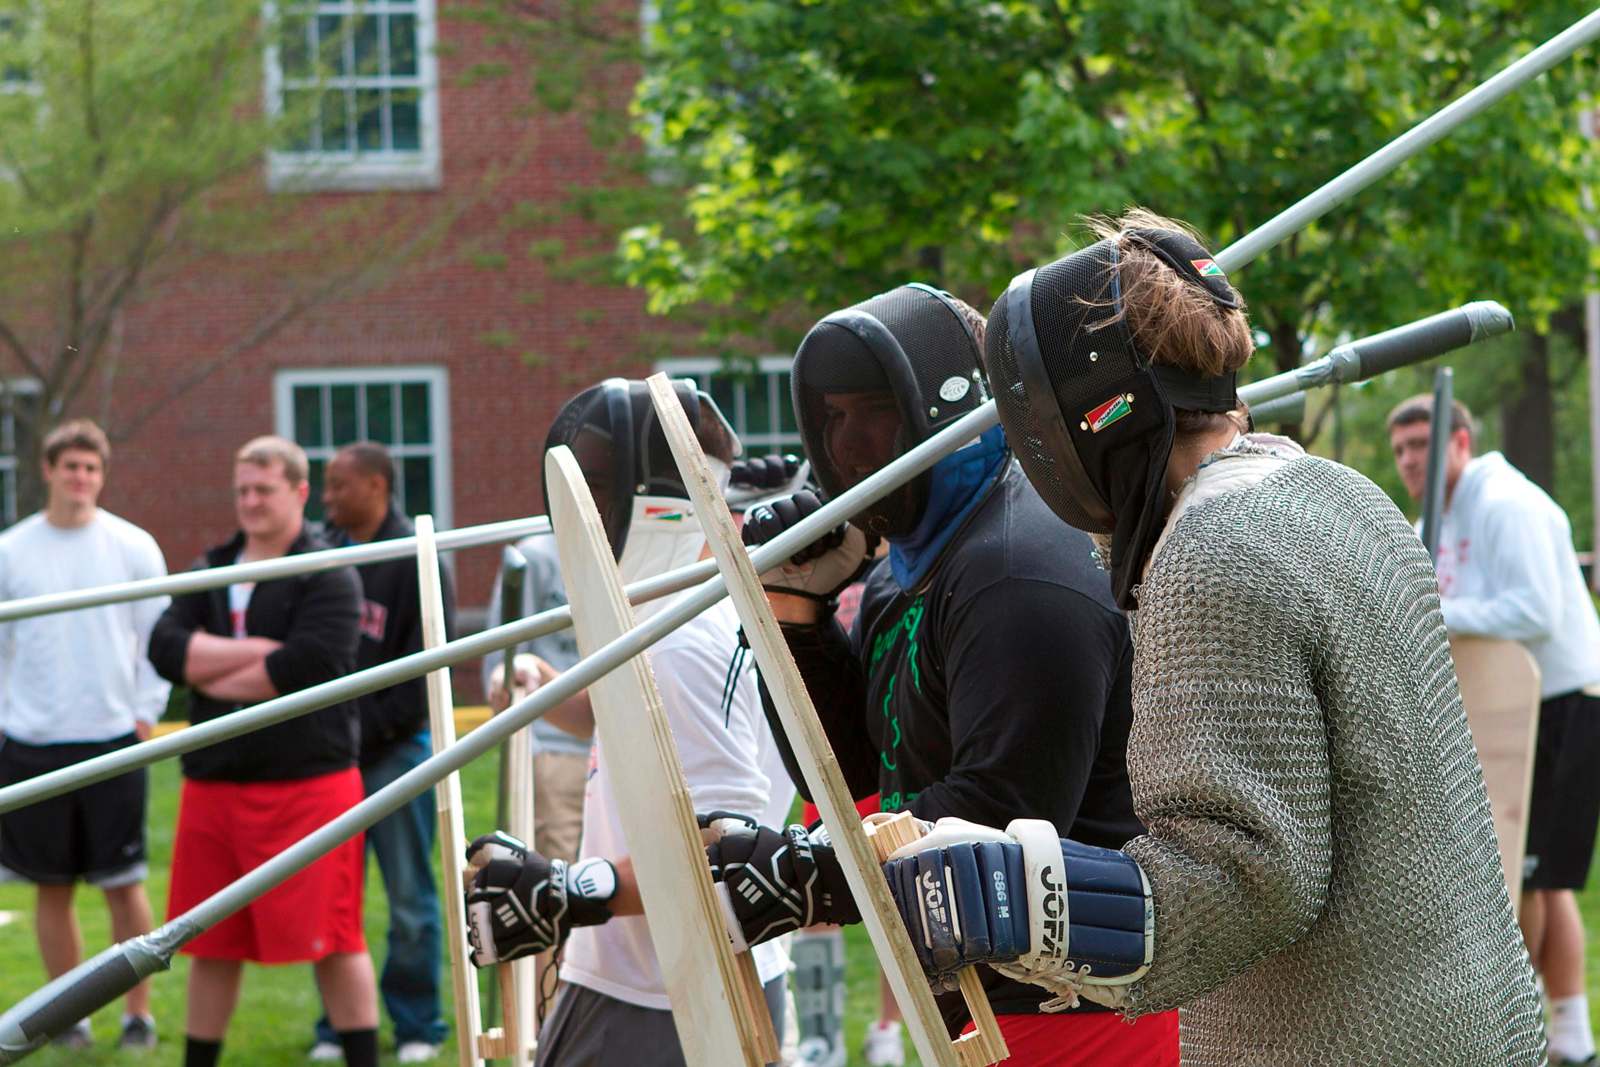 a group of people wearing fencing gear